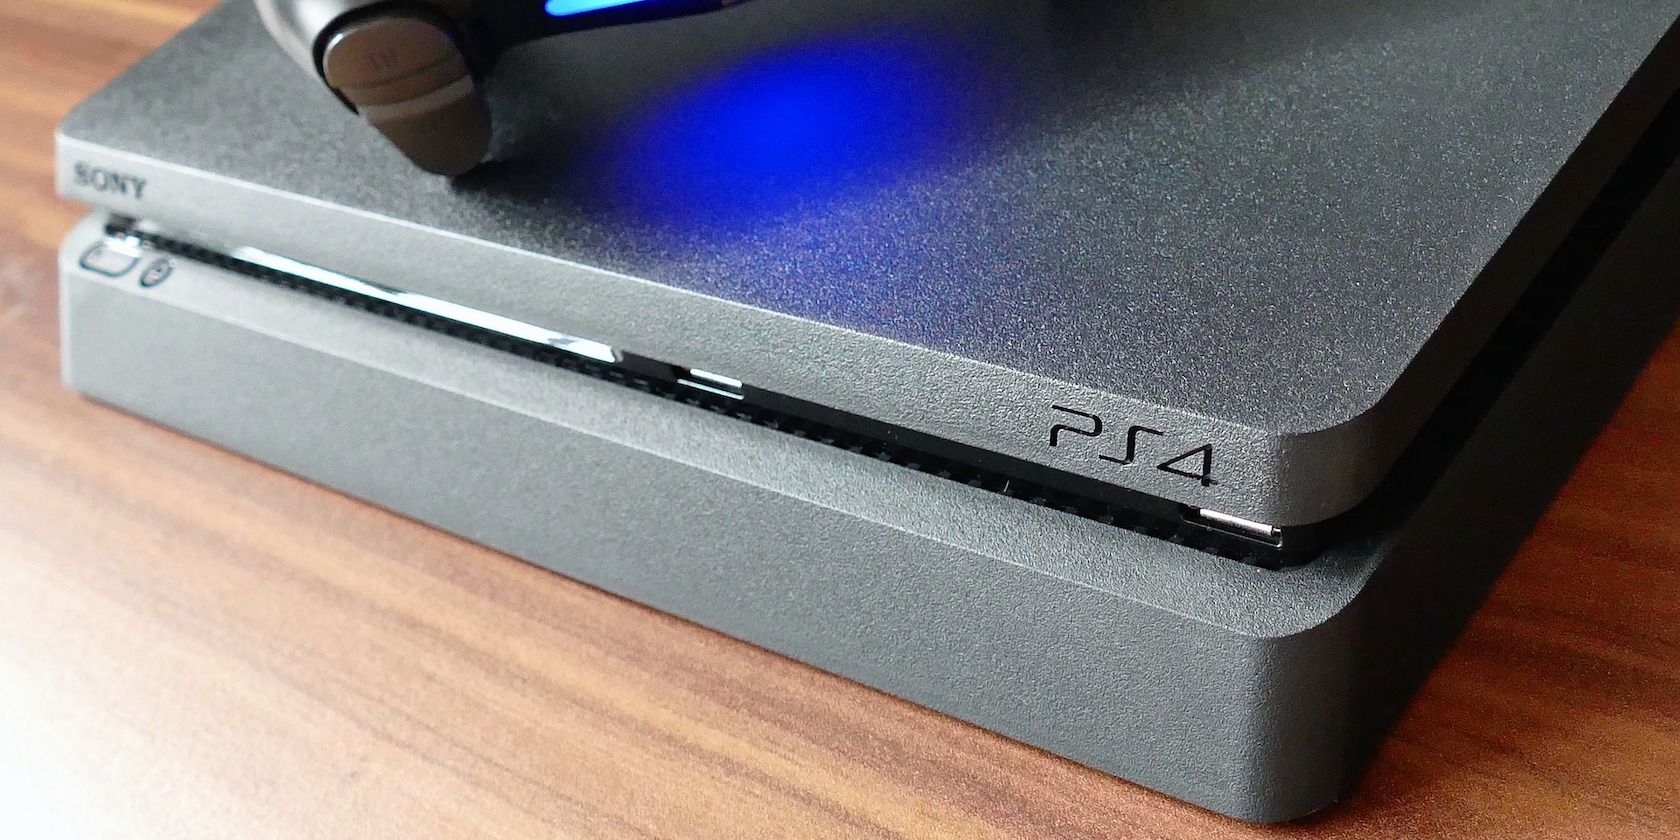 How to Set Up PS4's Parental Controls to Protect Your Children